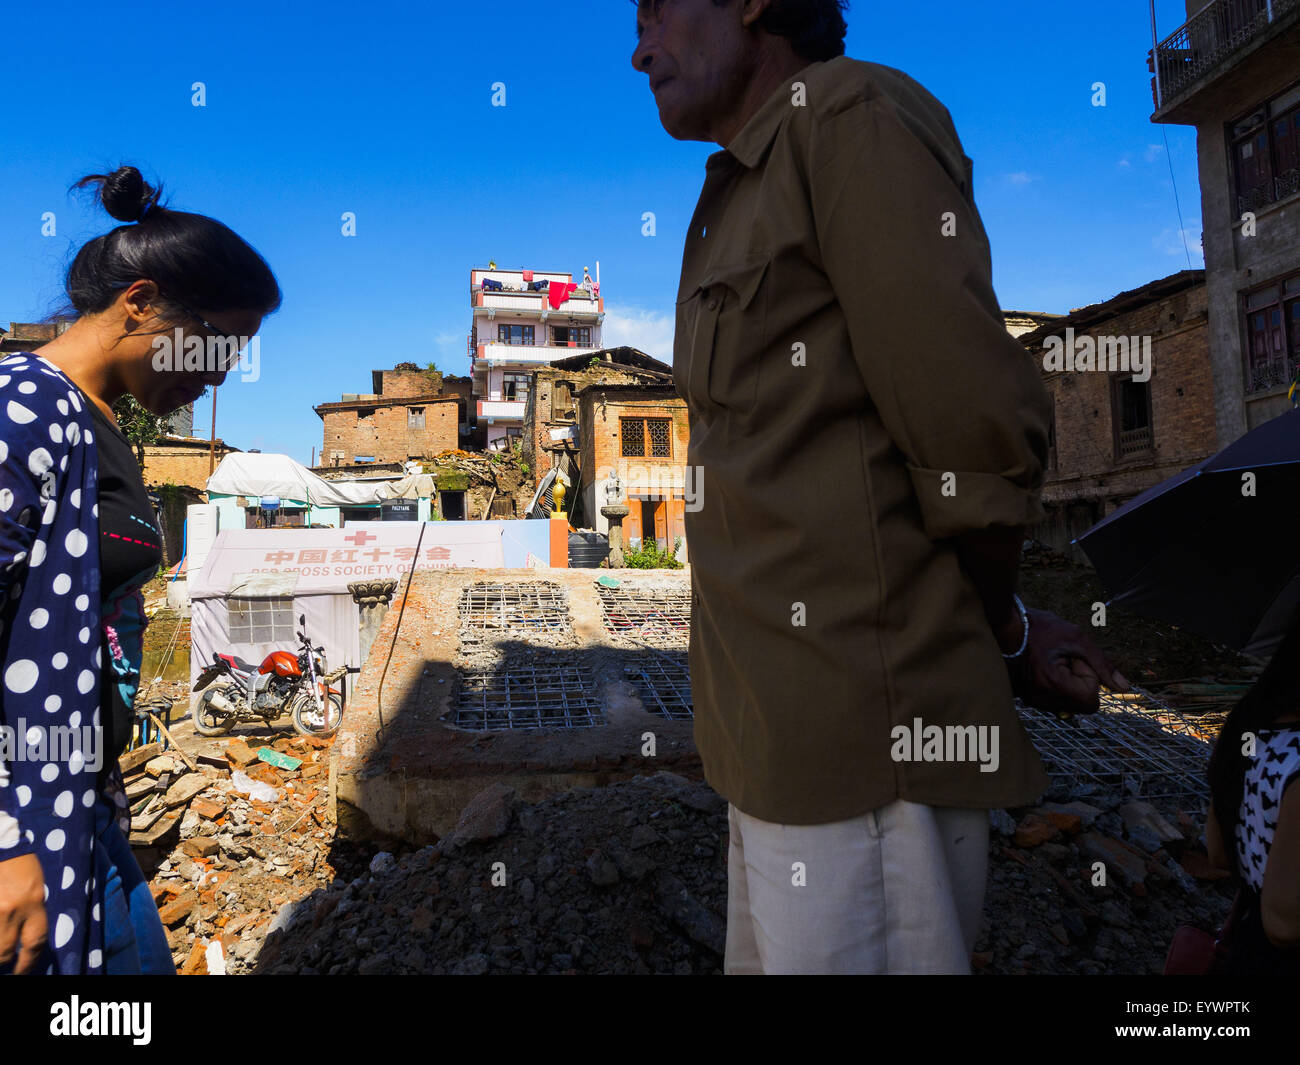 Sankhu, Central Region, Nepal. 3rd Aug, 2015. People walk past a Hindu temple destroyed in the Nepal earthquake in Sankhu, a community about 90 minutes from central Kathmandu. The Nepal Earthquake on April 25, 2015, (also known as the Gorkha earthquake) killed more than 9,000 people and injured more than 23,000. It had a magnitude of 7.8.  It was the worst natural disaster to strike Nepal since the 1934 Nepal''“Bihar earthquake. © ZUMA Press, Inc./Alamy Live News Stock Photo